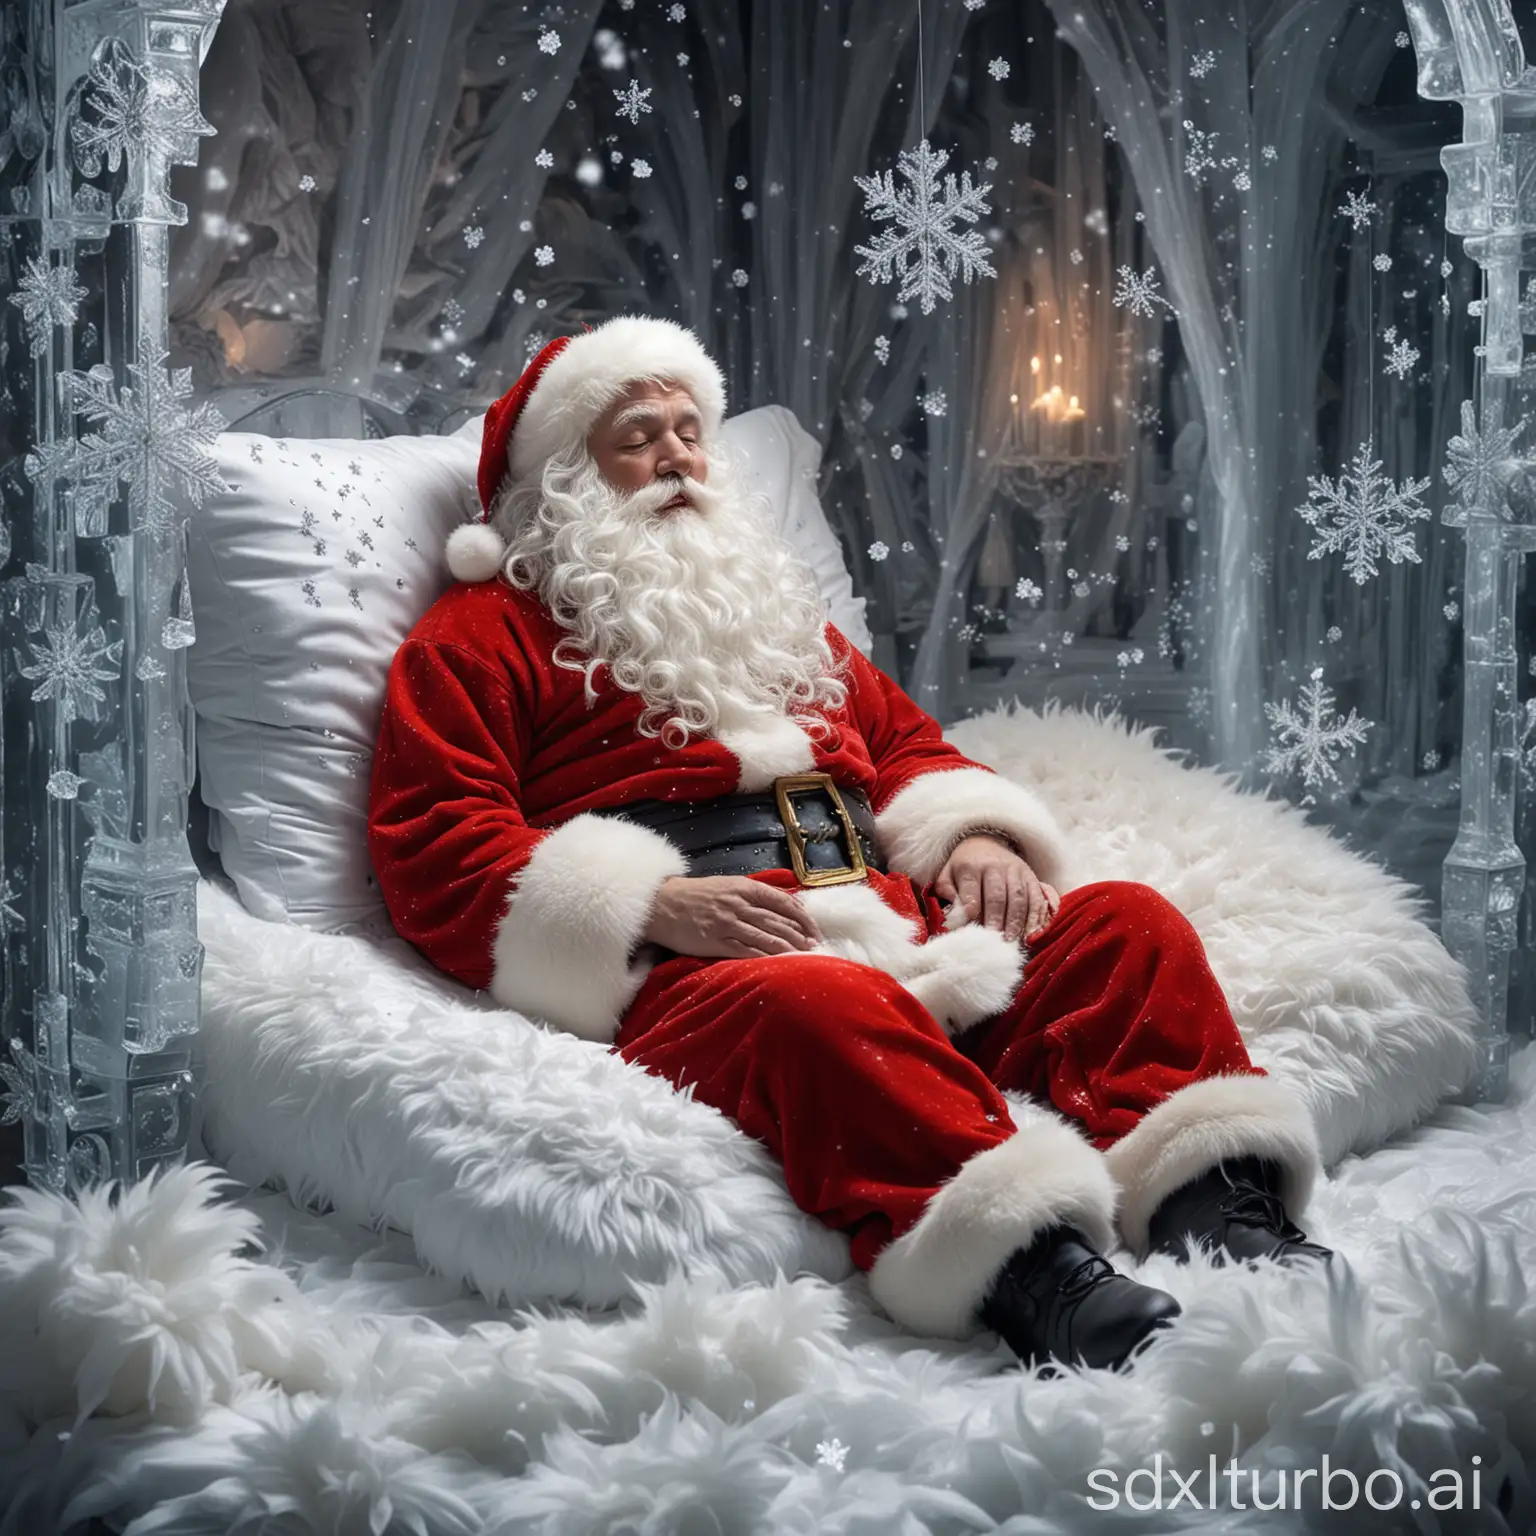 Santa Claus sleeps deeply in his magnificent, sparkling ice palace. Glittering snowflakes float around him as he is wrapped in a thick, fluffy fur.